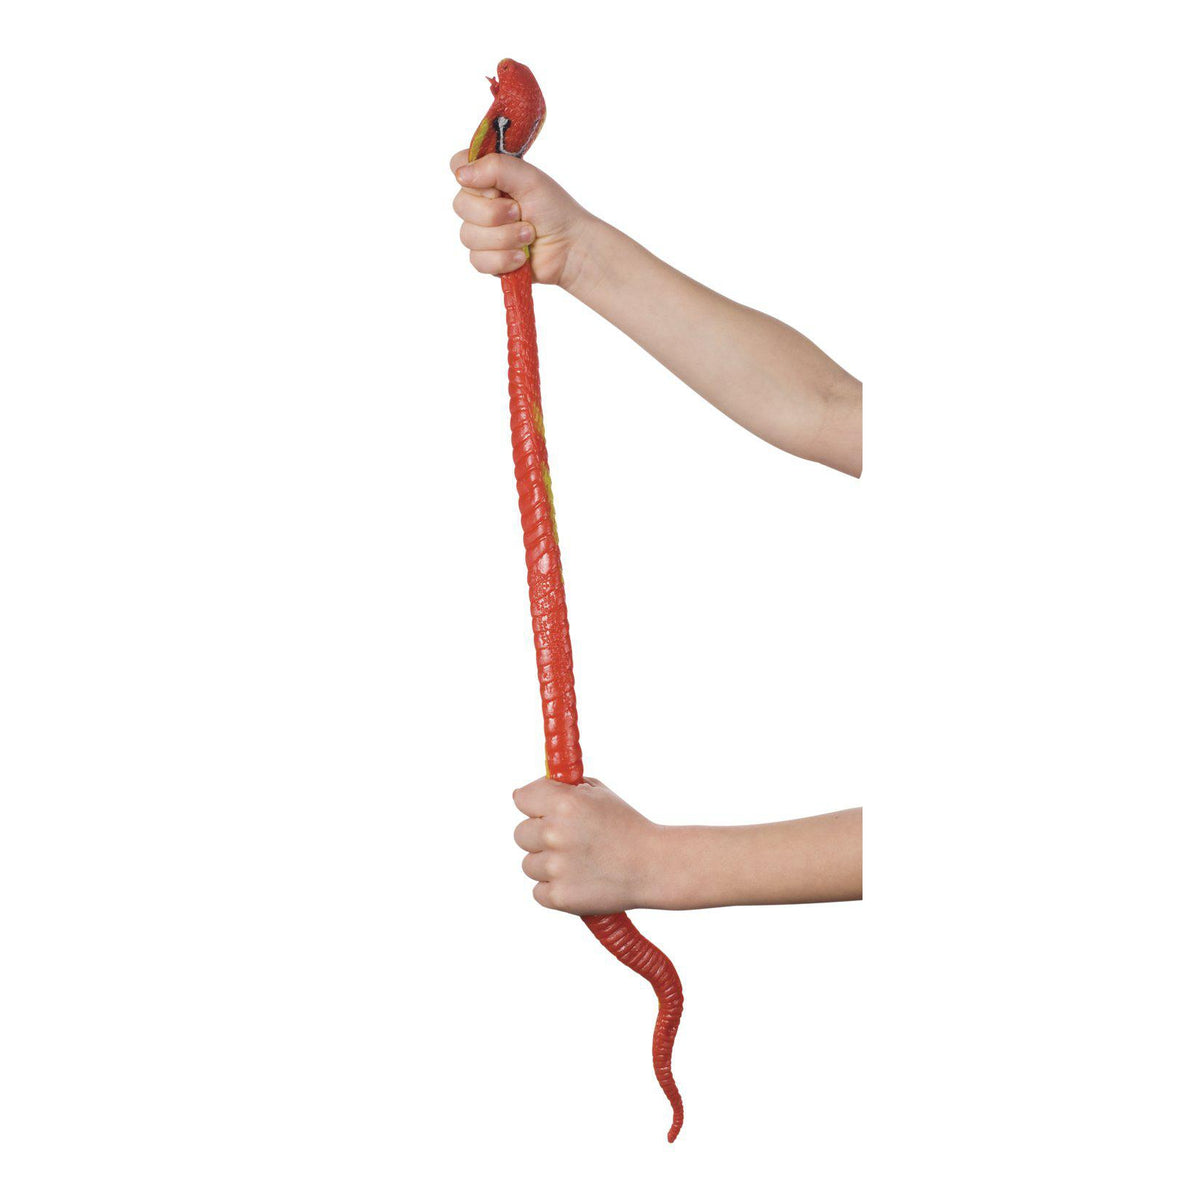 Front view of a person showing only their hands and forearms stretching out a red Squishy Snake.